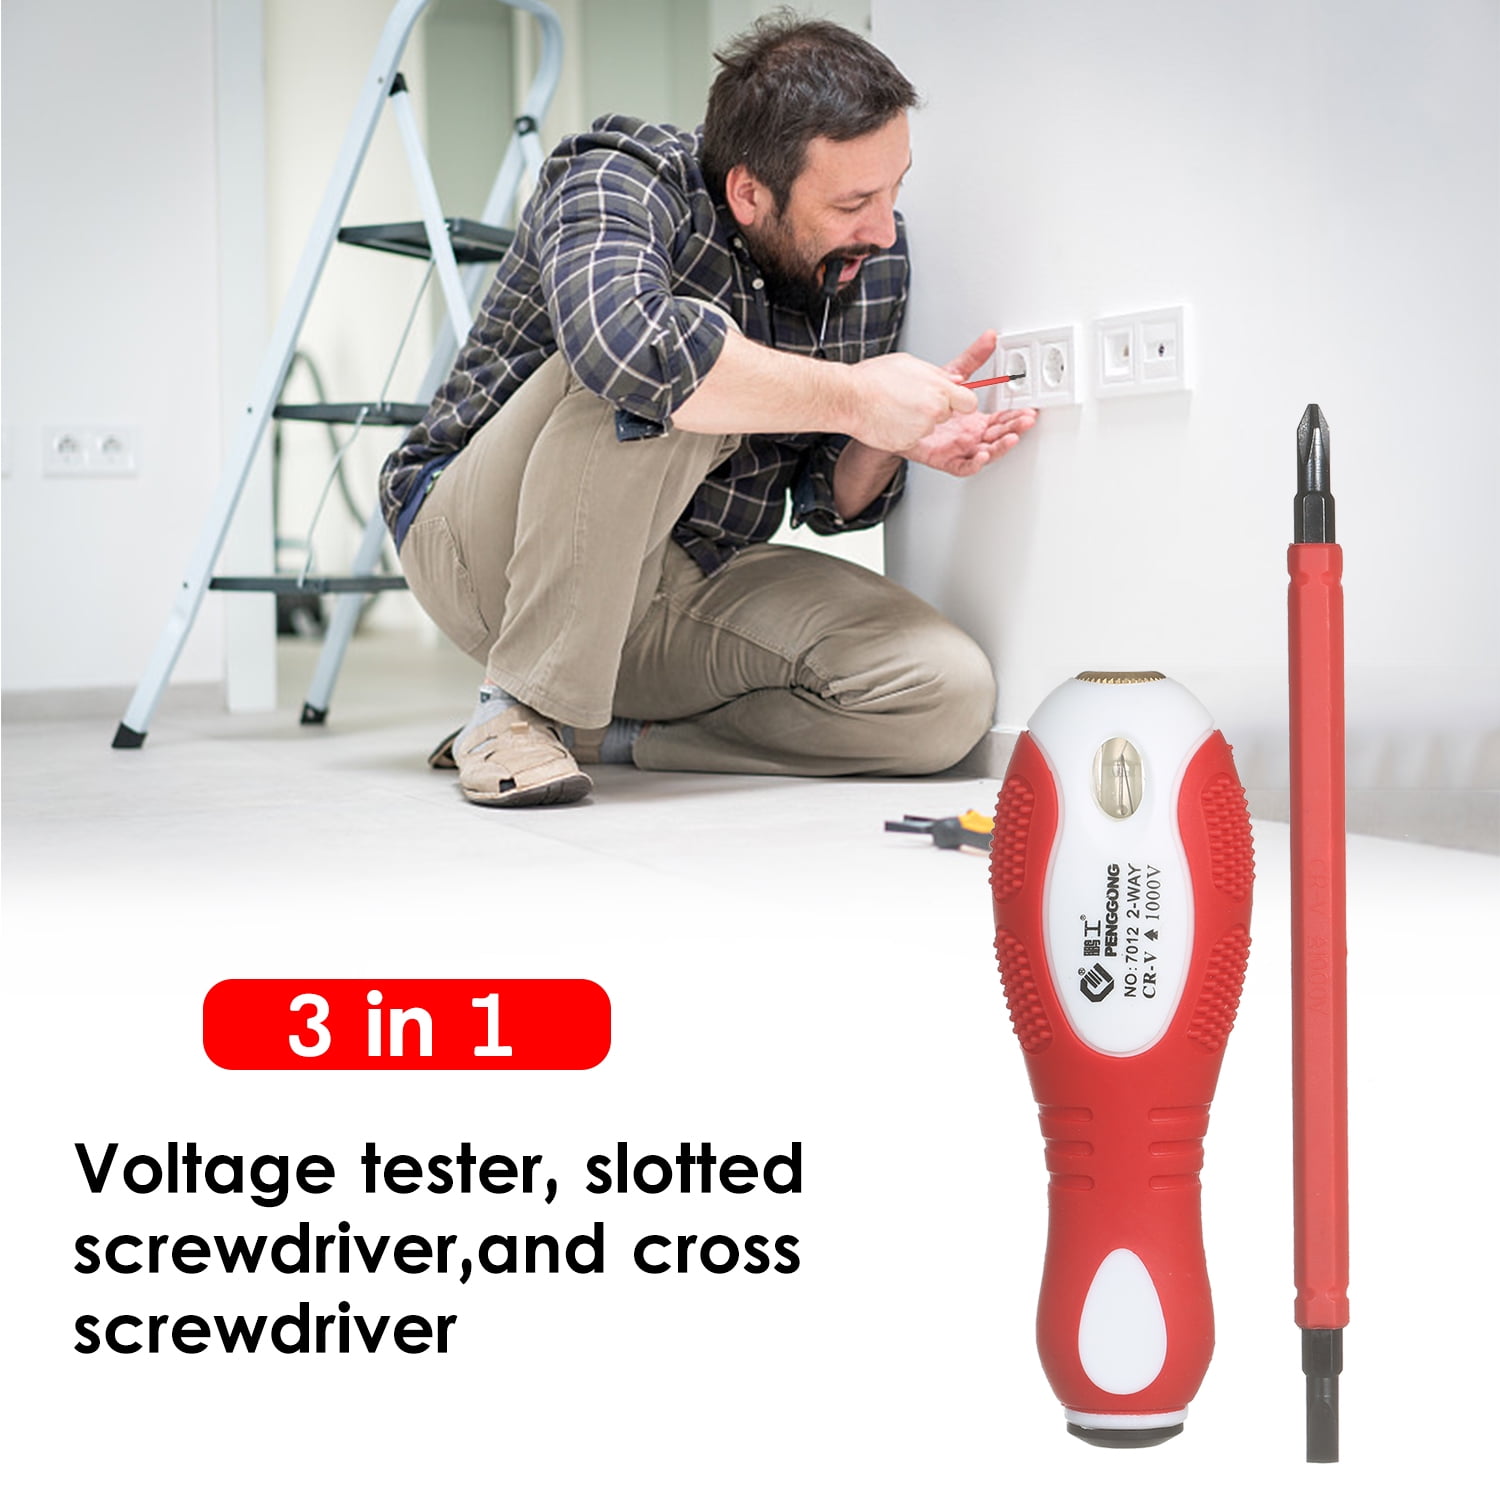 touch screwdriver voltage tester set of 2 